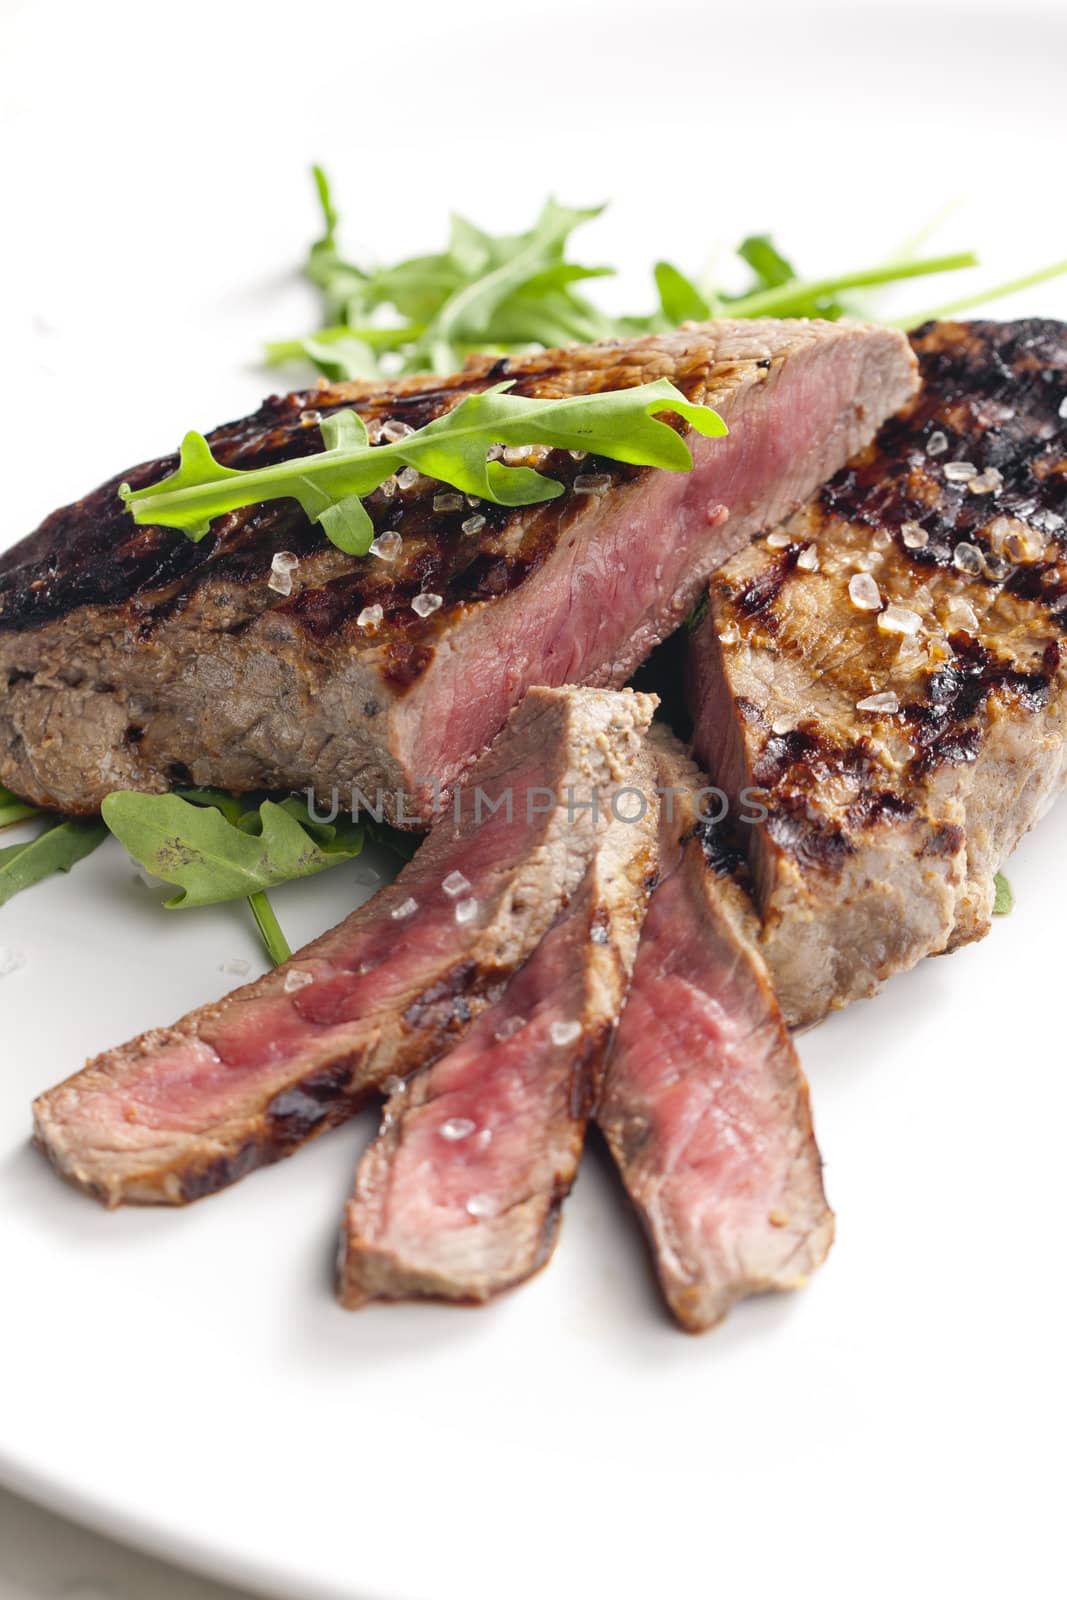 grilled beefsteak pickled in Dijon mustard with ruccola